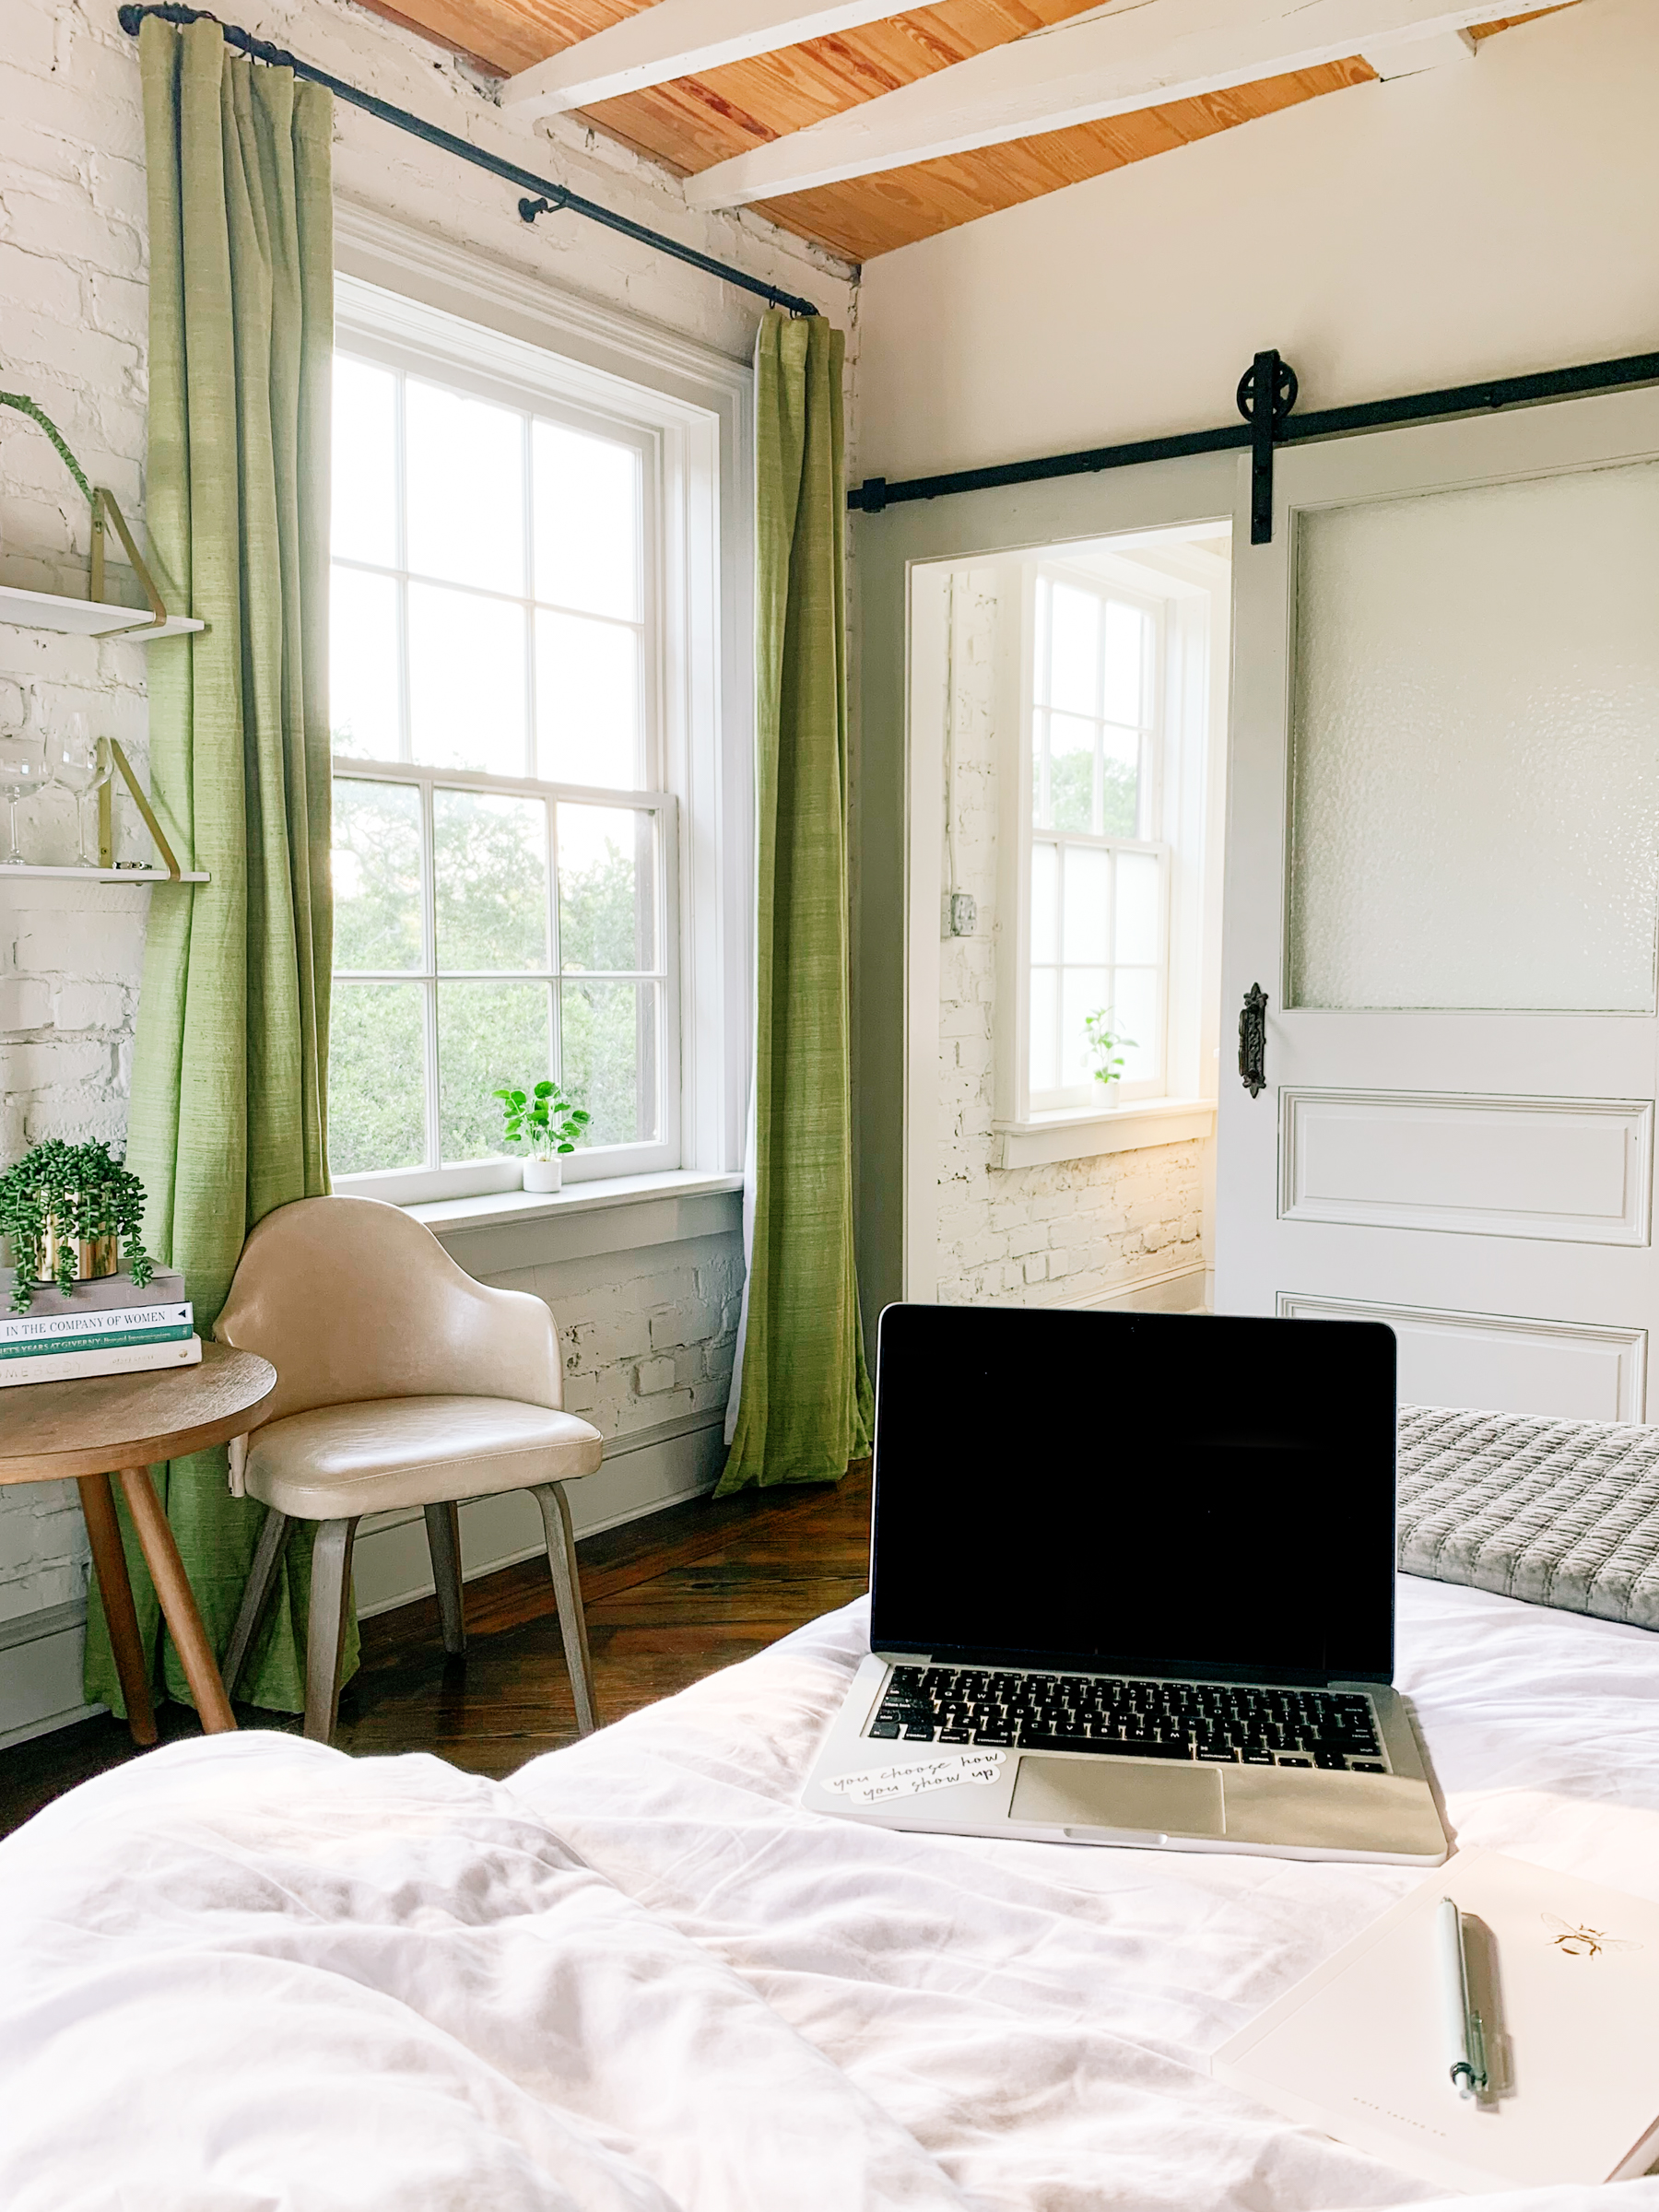 6 Ways to End Your Workday When Working From Home